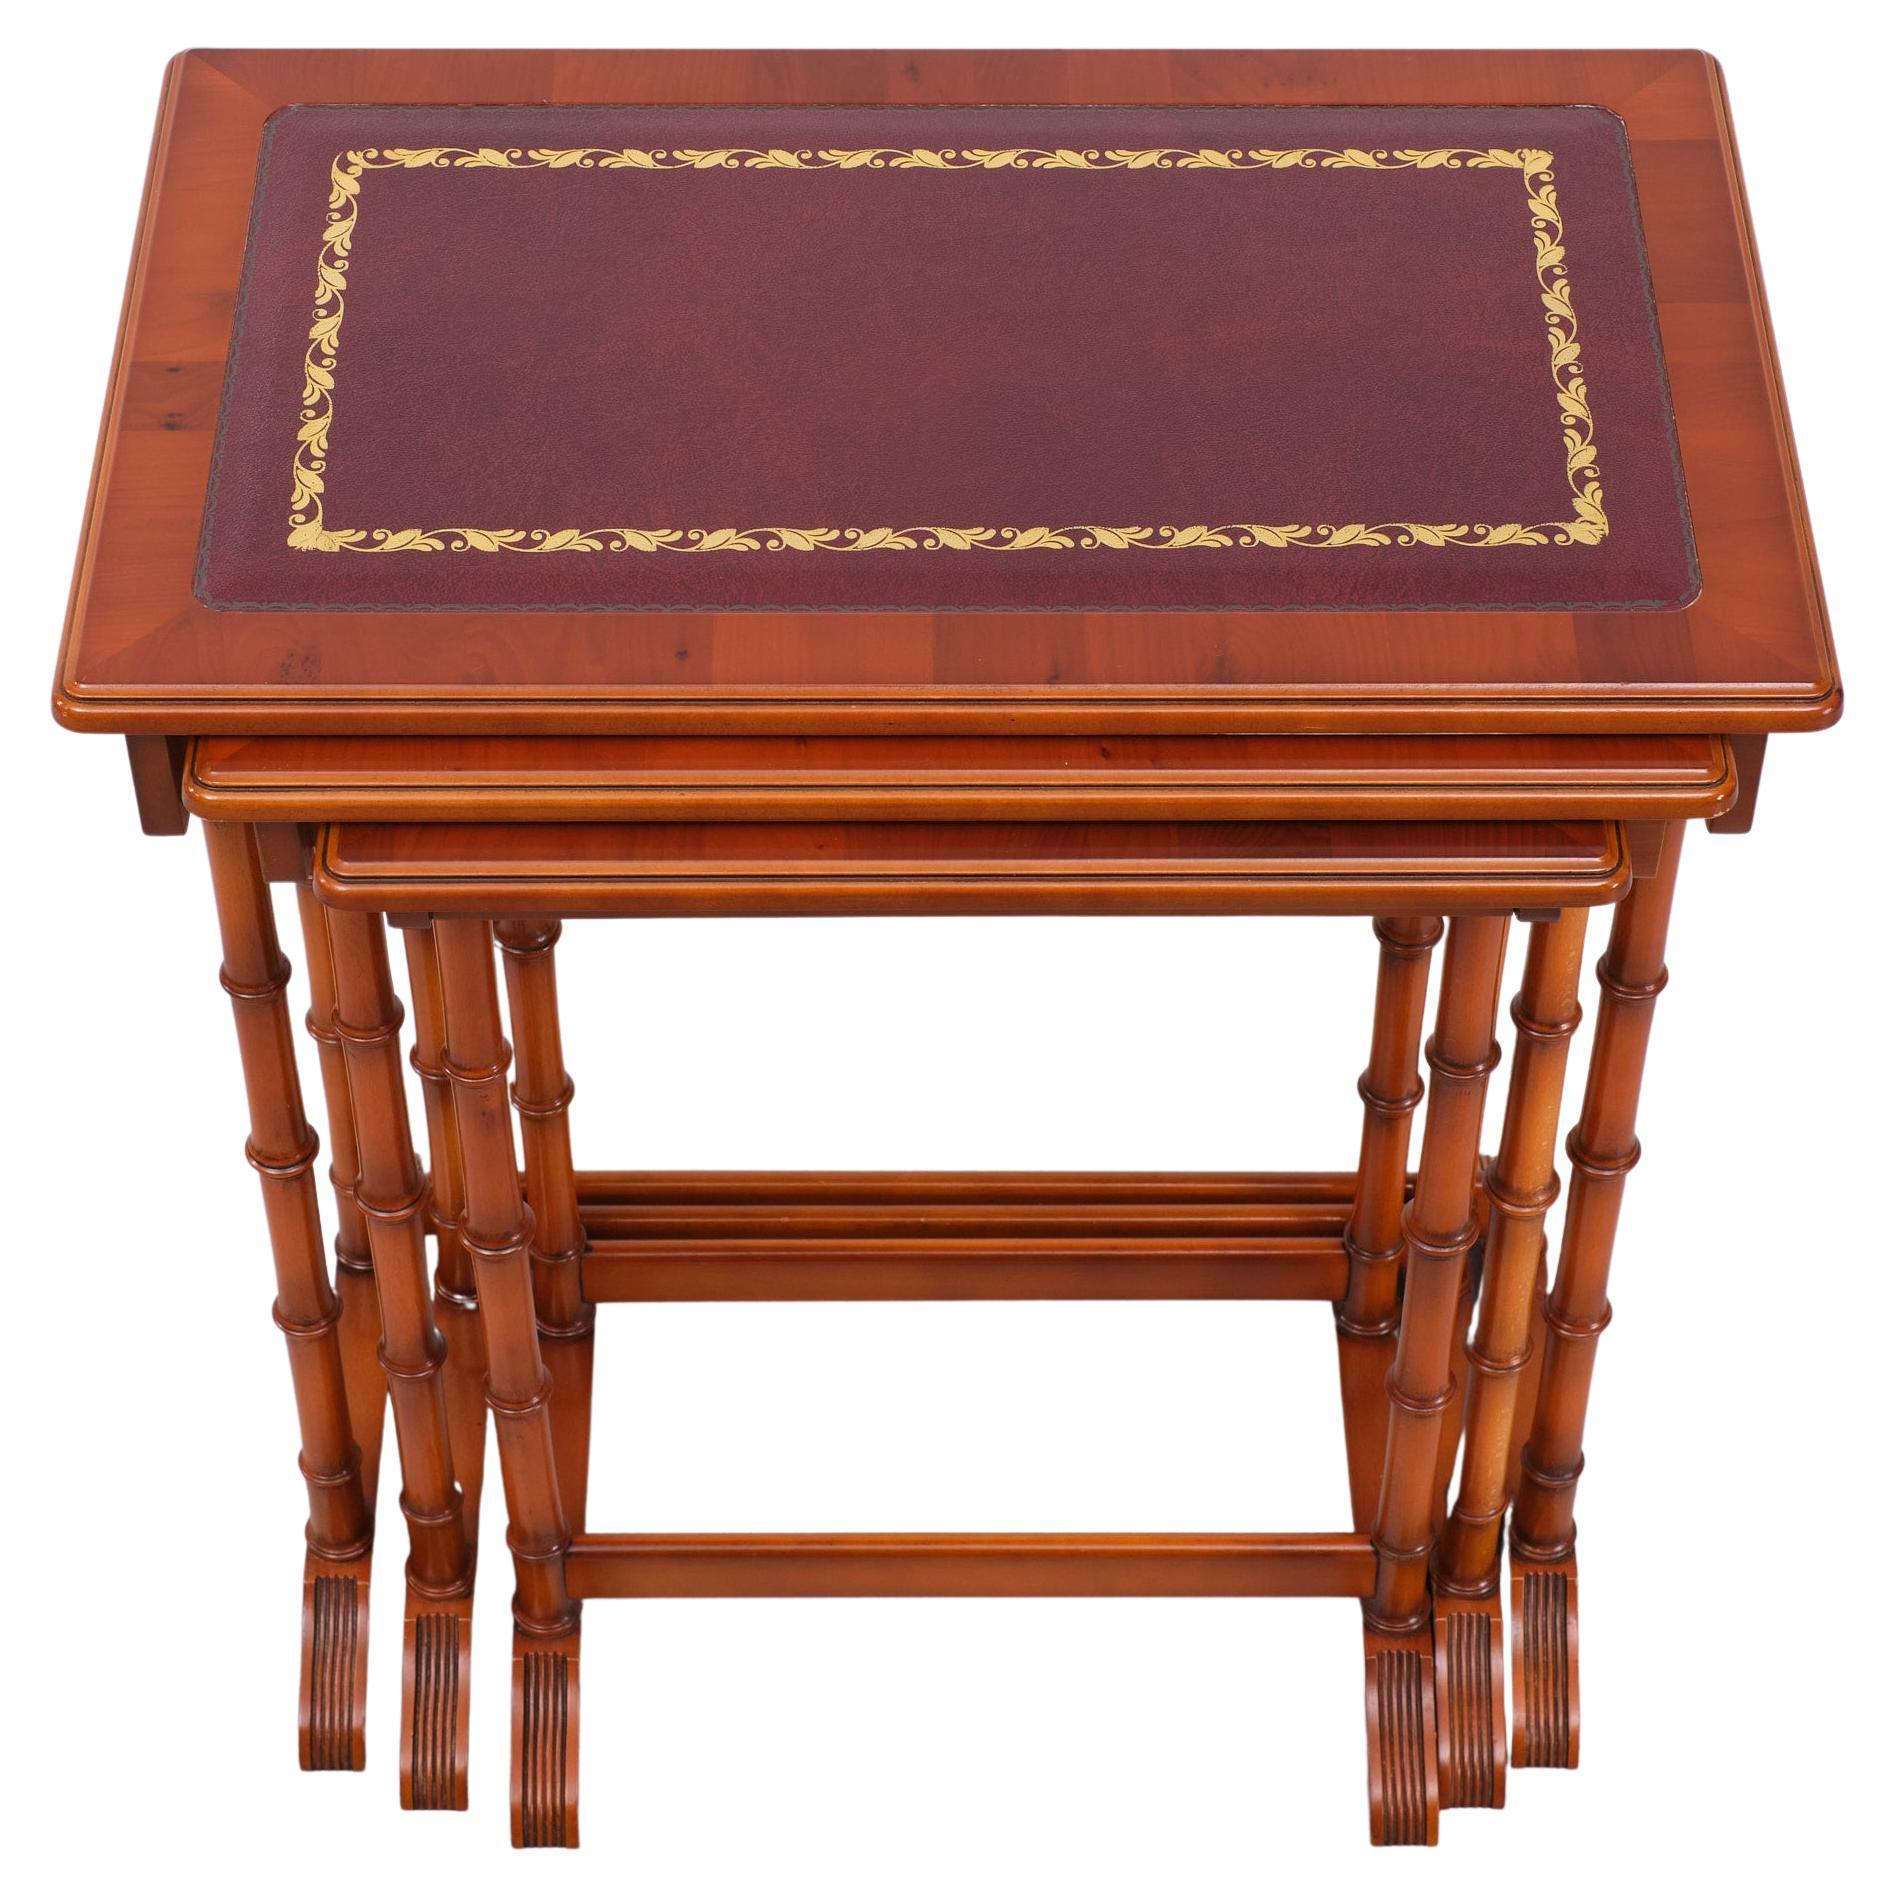 Superb Cherry wood Nesting table . Dark Red Leather. embossed Gold decoration .
Faux Bamboo legs .Hanging on one of each other . Top quality tables .Perfect condition. attributed to Reprodux Exclusive English furniture . 

Please don't hesitate to